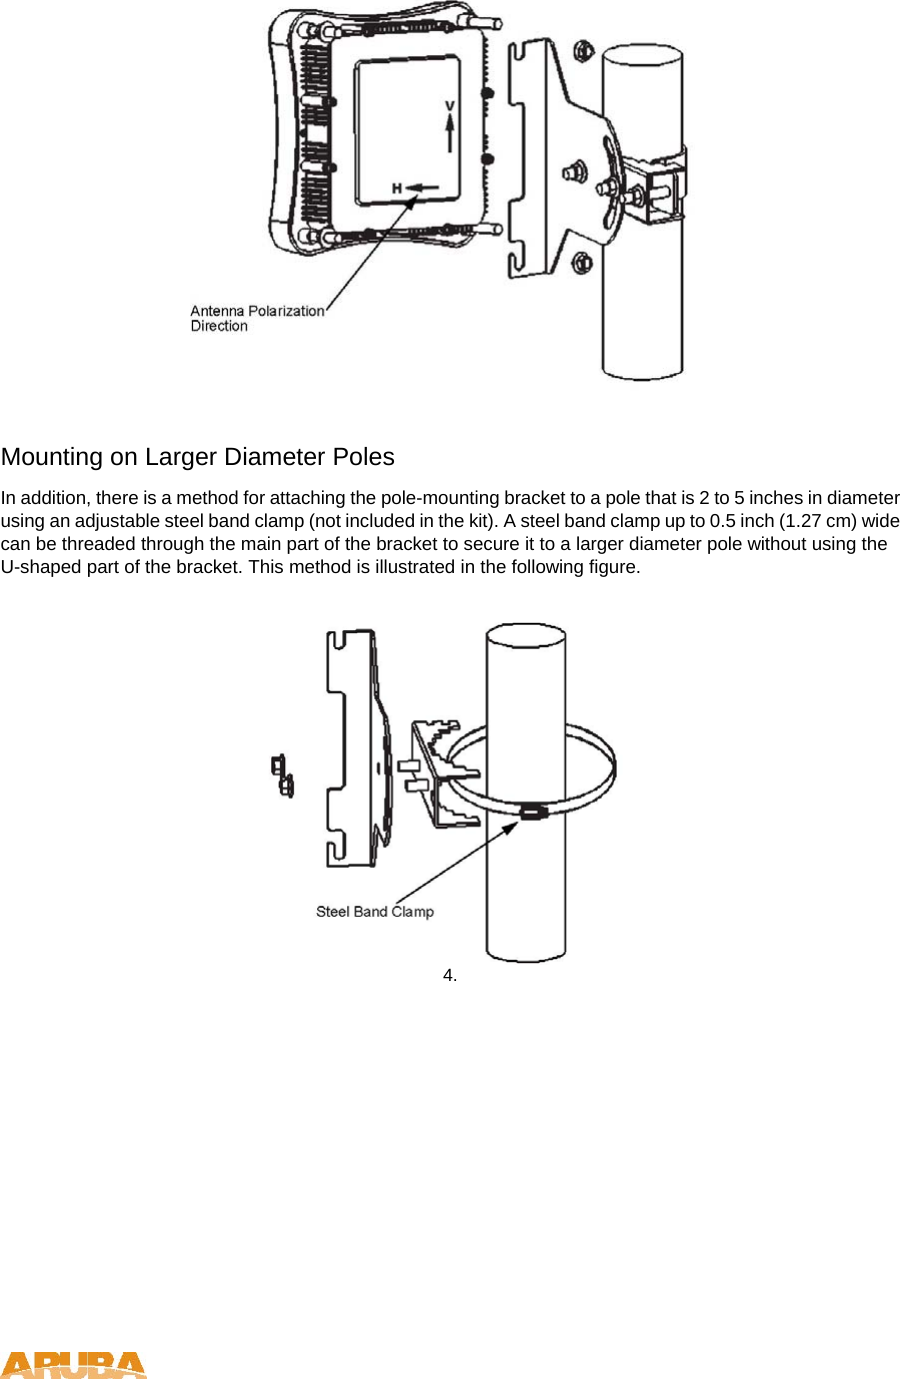   Mounting on Larger Diameter Poles  In addition, there is a method for attaching the pole-mounting bracket to a pole that is 2 to 5 inches in diameter using an adjustable steel band clamp (not included in the kit). A steel band clamp up to 0.5 inch (1.27 cm) wide can be threaded through the main part of the bracket to secure it to a larger diameter pole without using the U-shaped part of the bracket. This method is illustrated in the following figure.   4.    